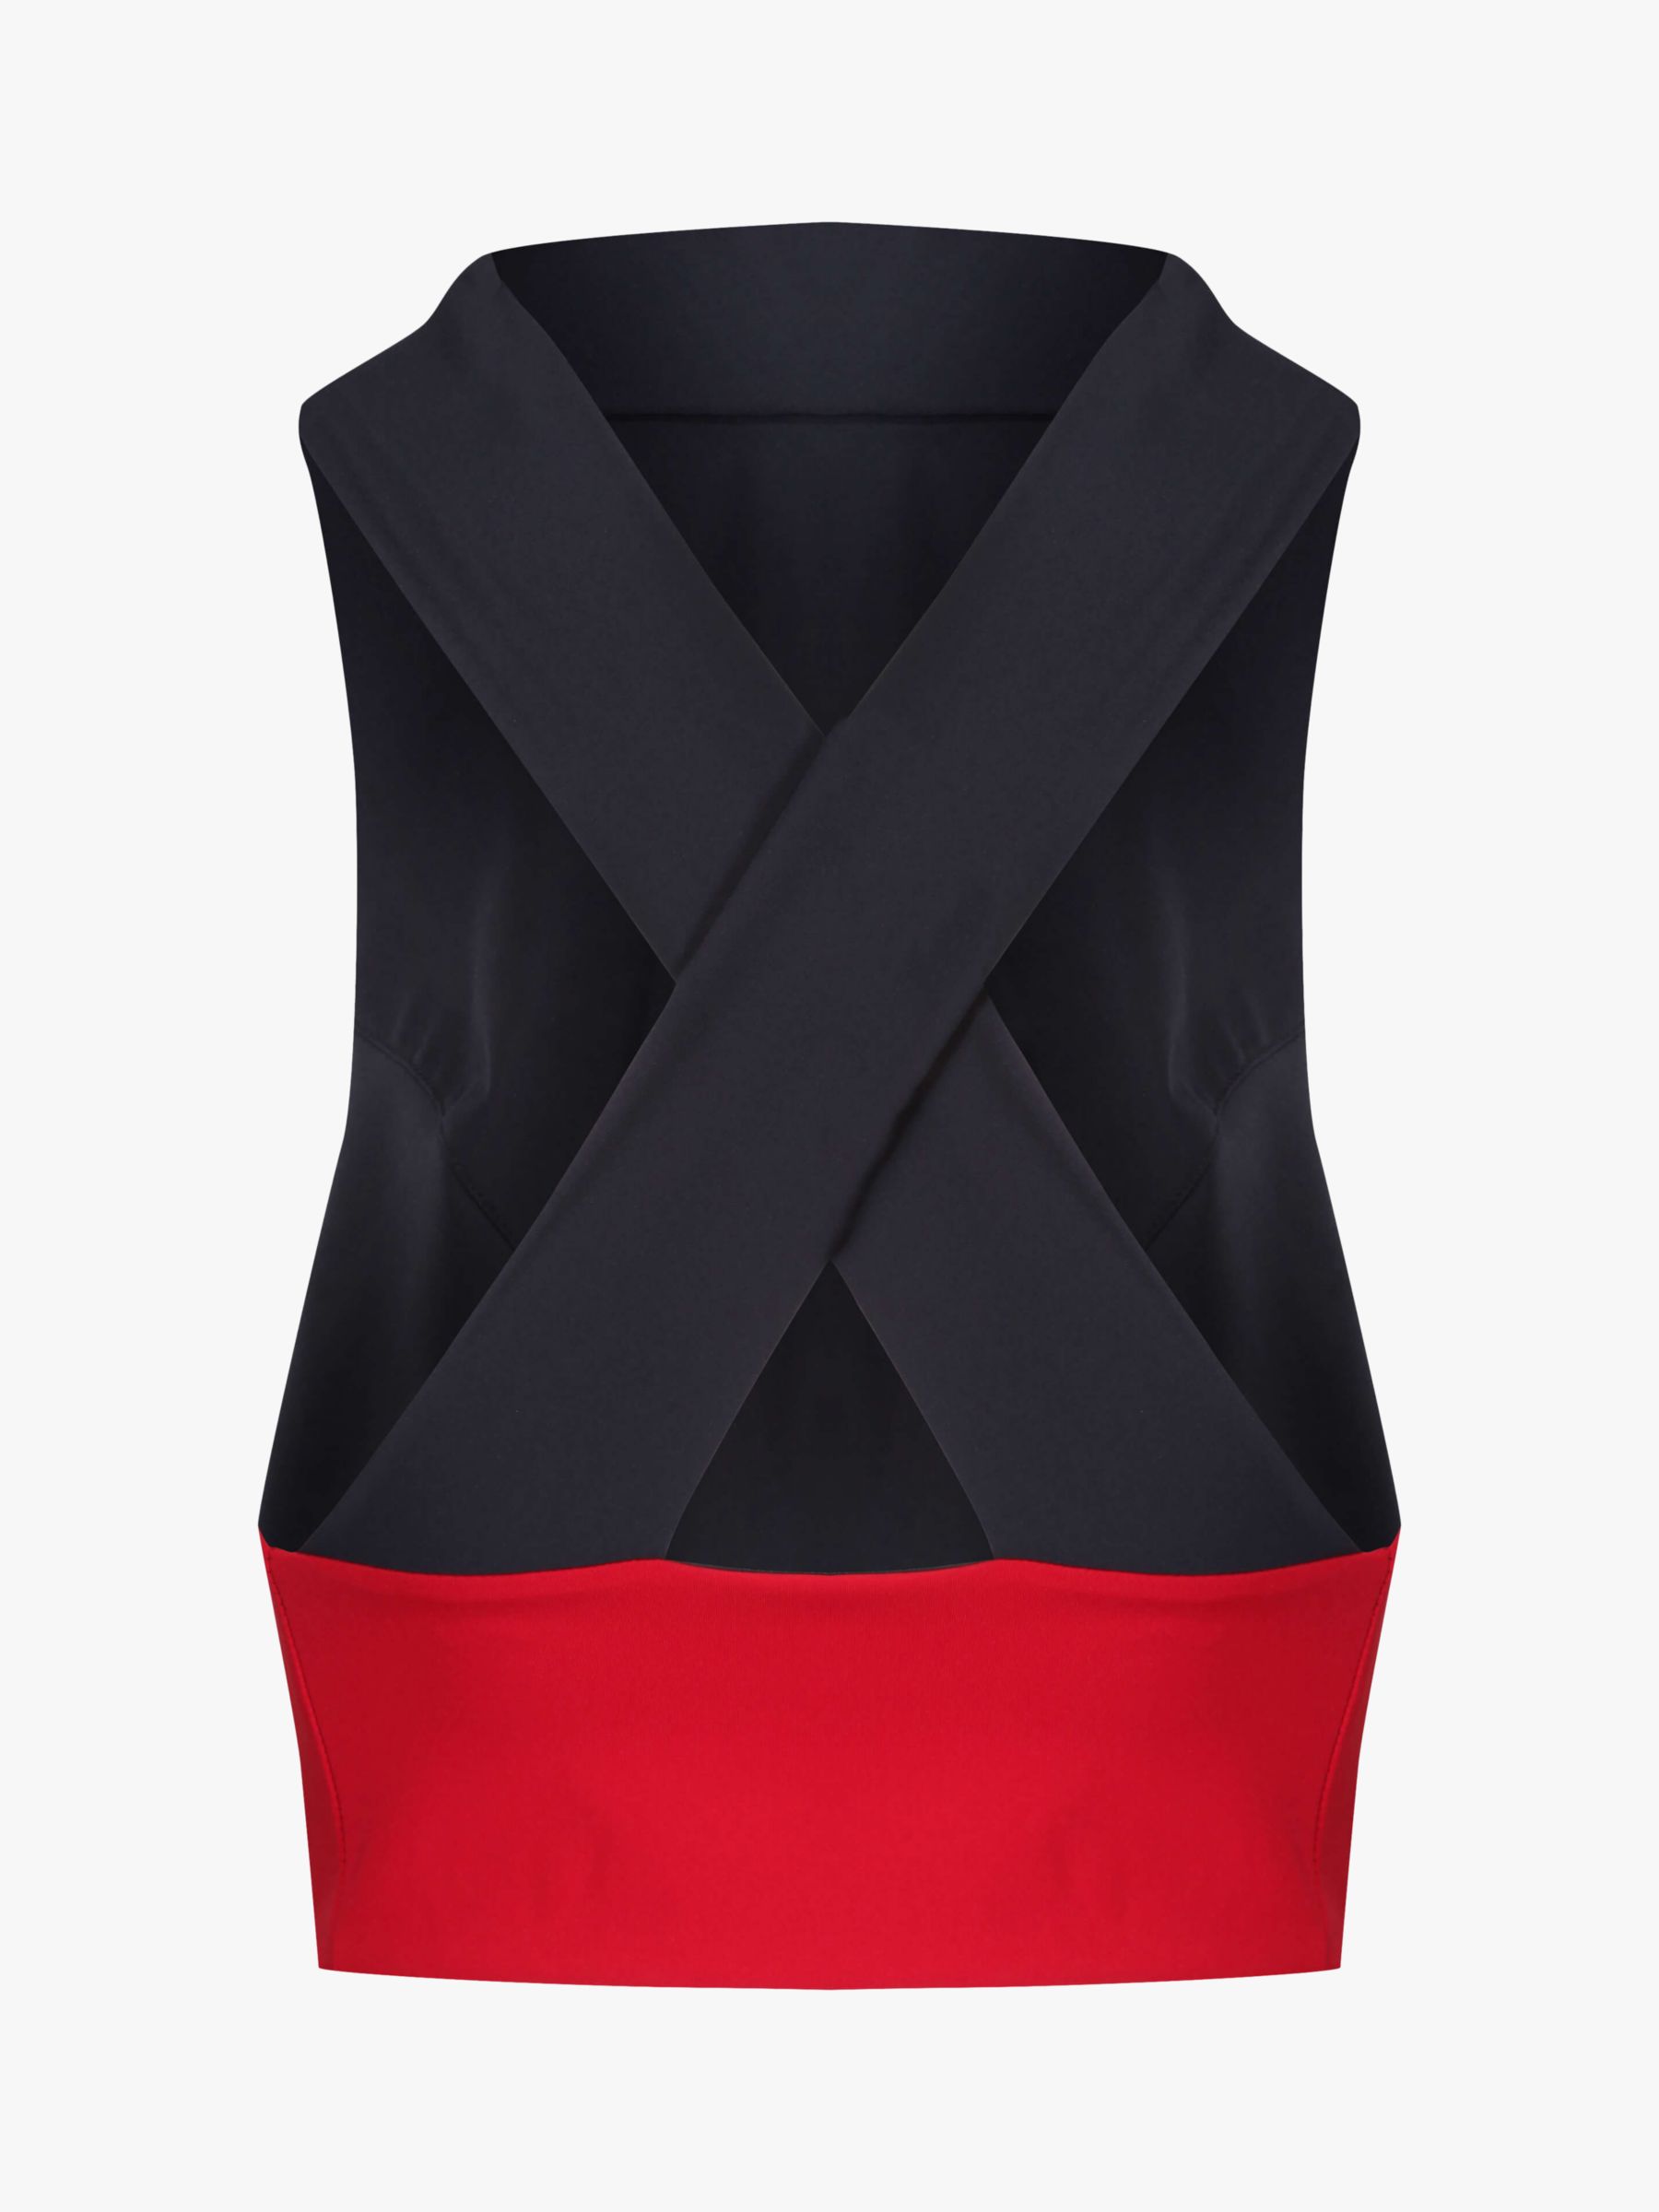 Davy J The Reversible Crop Top, Red/Black, 8